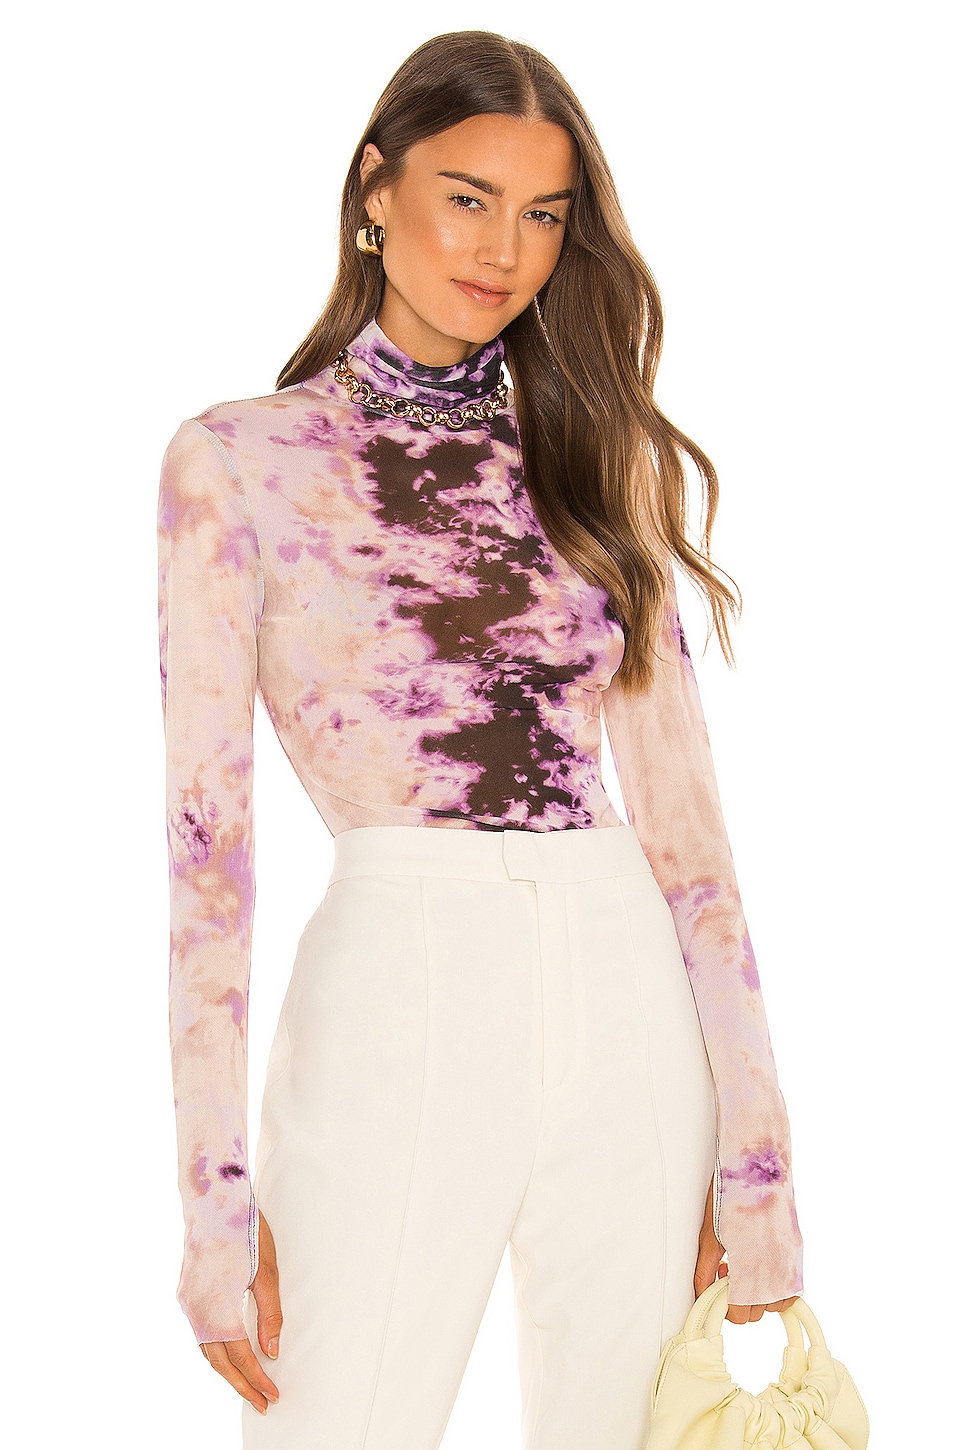 AFRM x REVOLVE Zadie Top in Purple Placement | REVOLVE